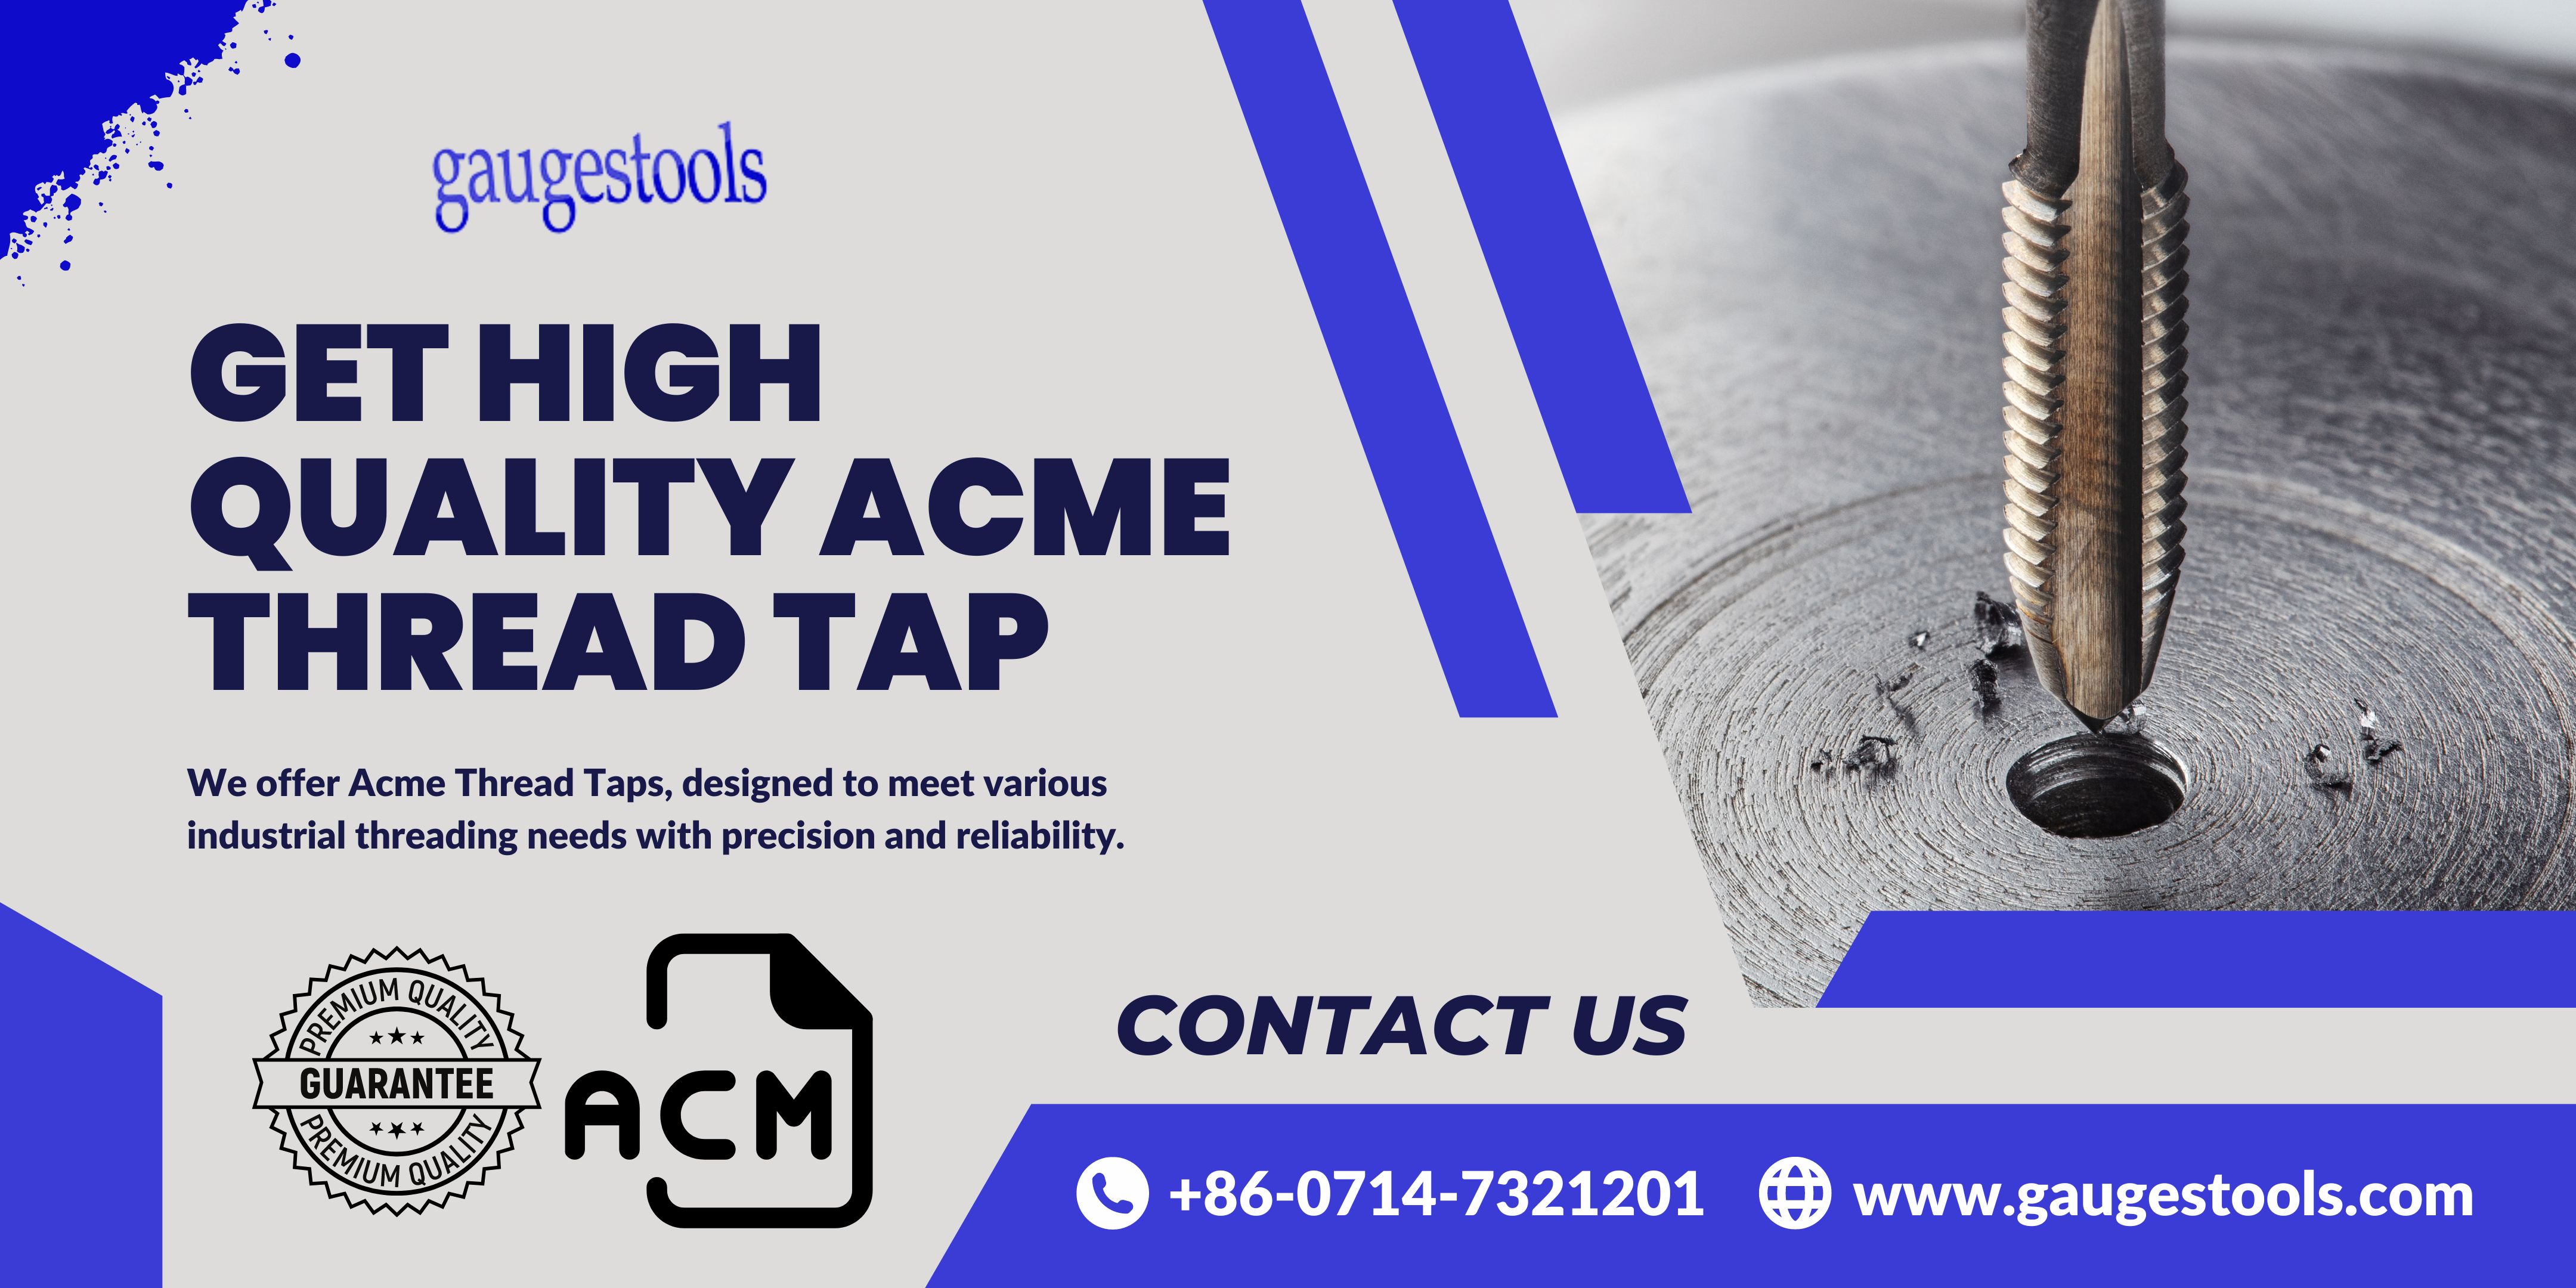 Expert Tips for Selecting the Best Acme Thread Tap for Your Needs